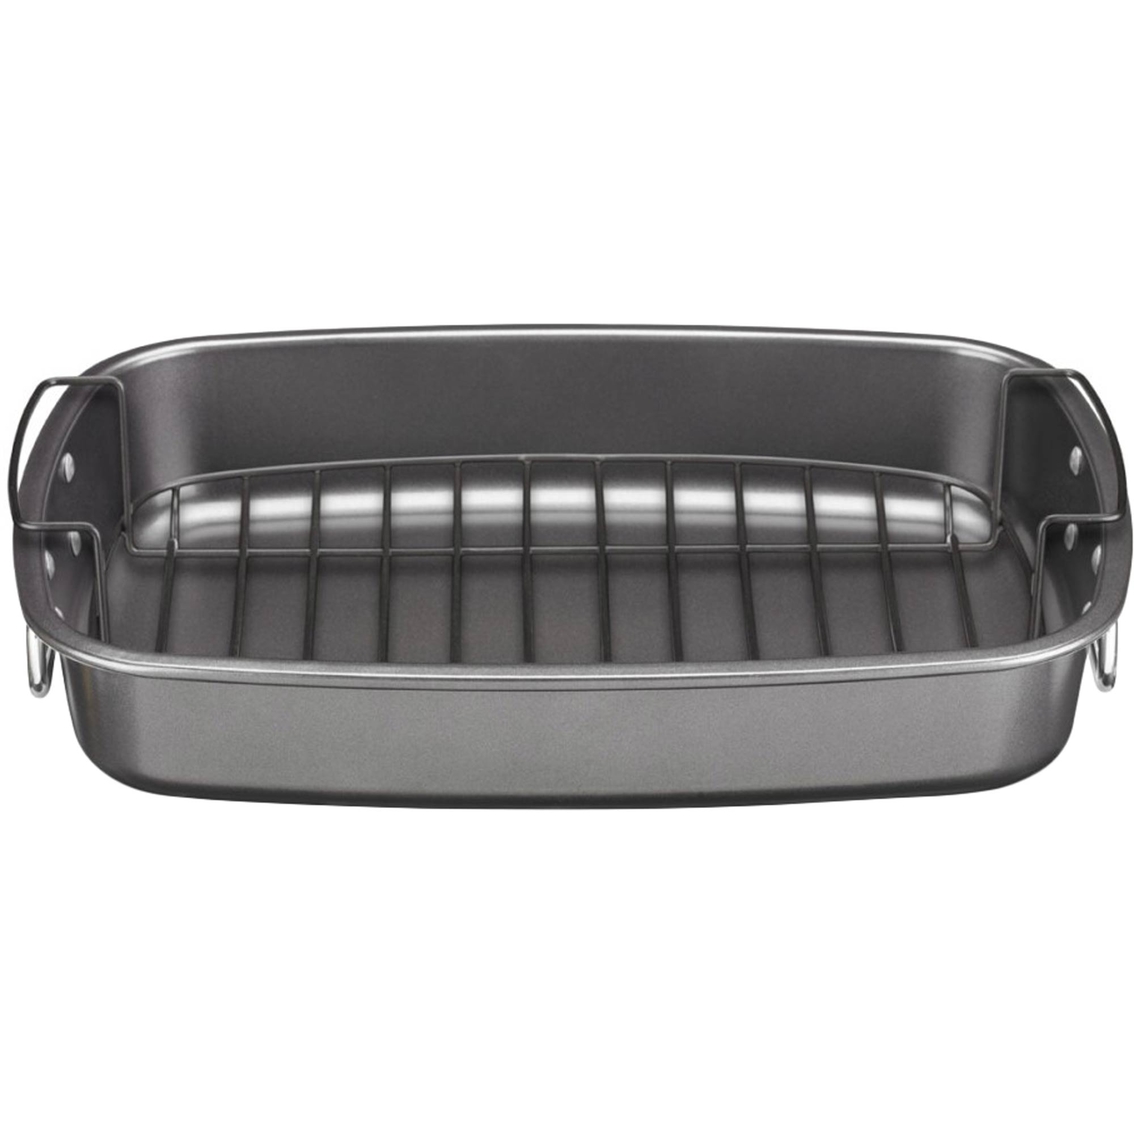 Cuisinart Ovenware Classic Collection Carbon Steel Roaster With Rack 17 X  12 In., Roasting & Broiling Pans, Household